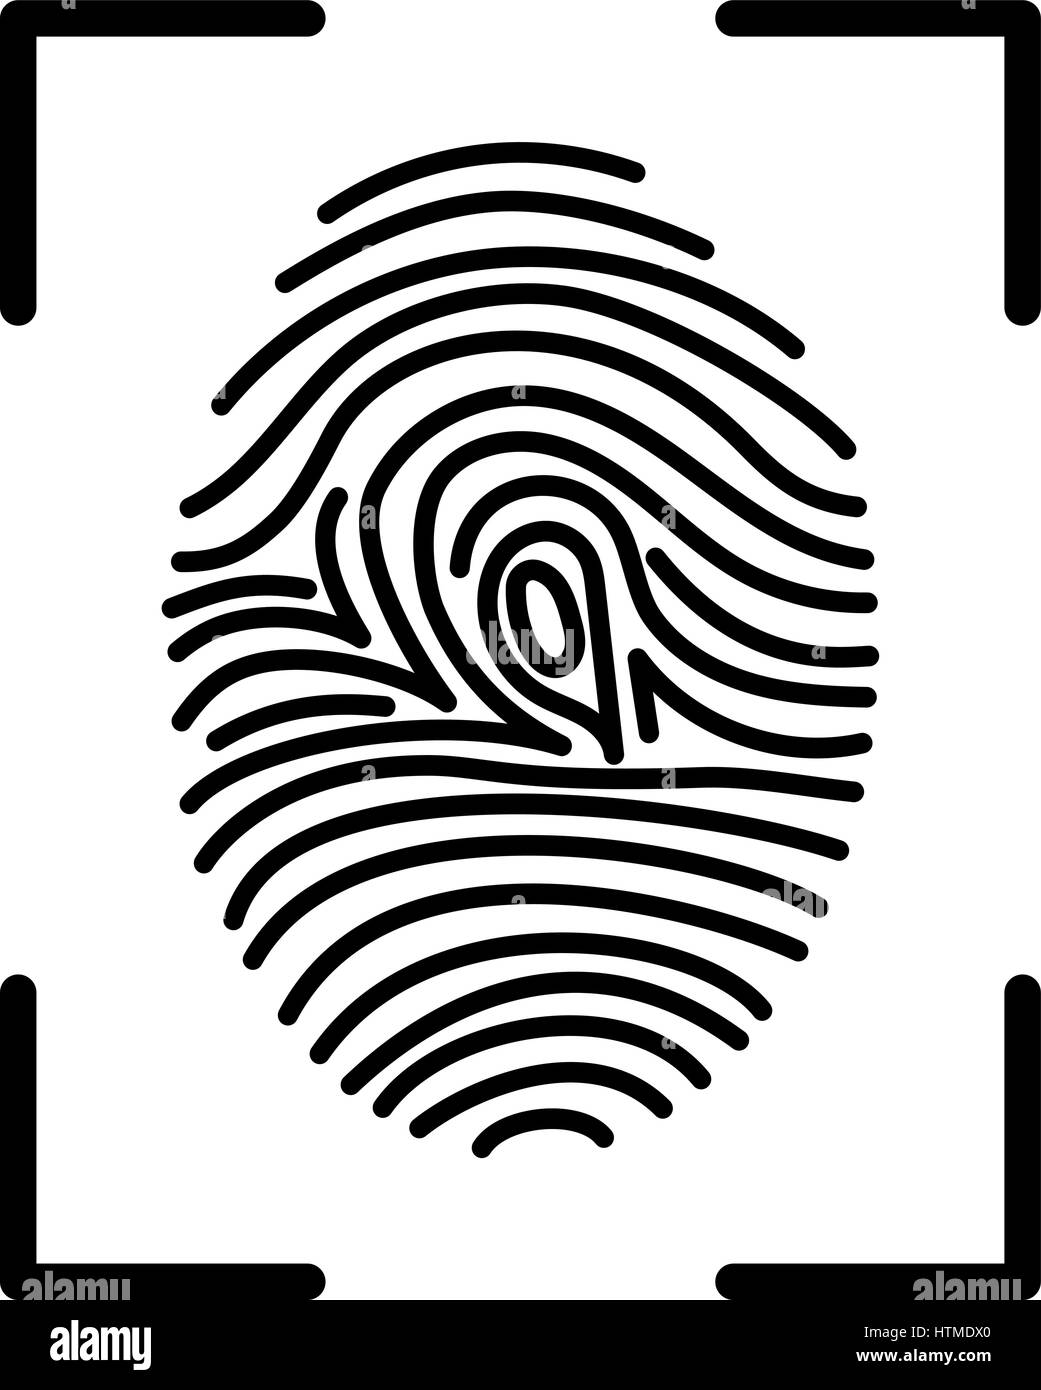 Fingerprint line icon. Vector design template elements for your application or corporate identity. Stock Vector